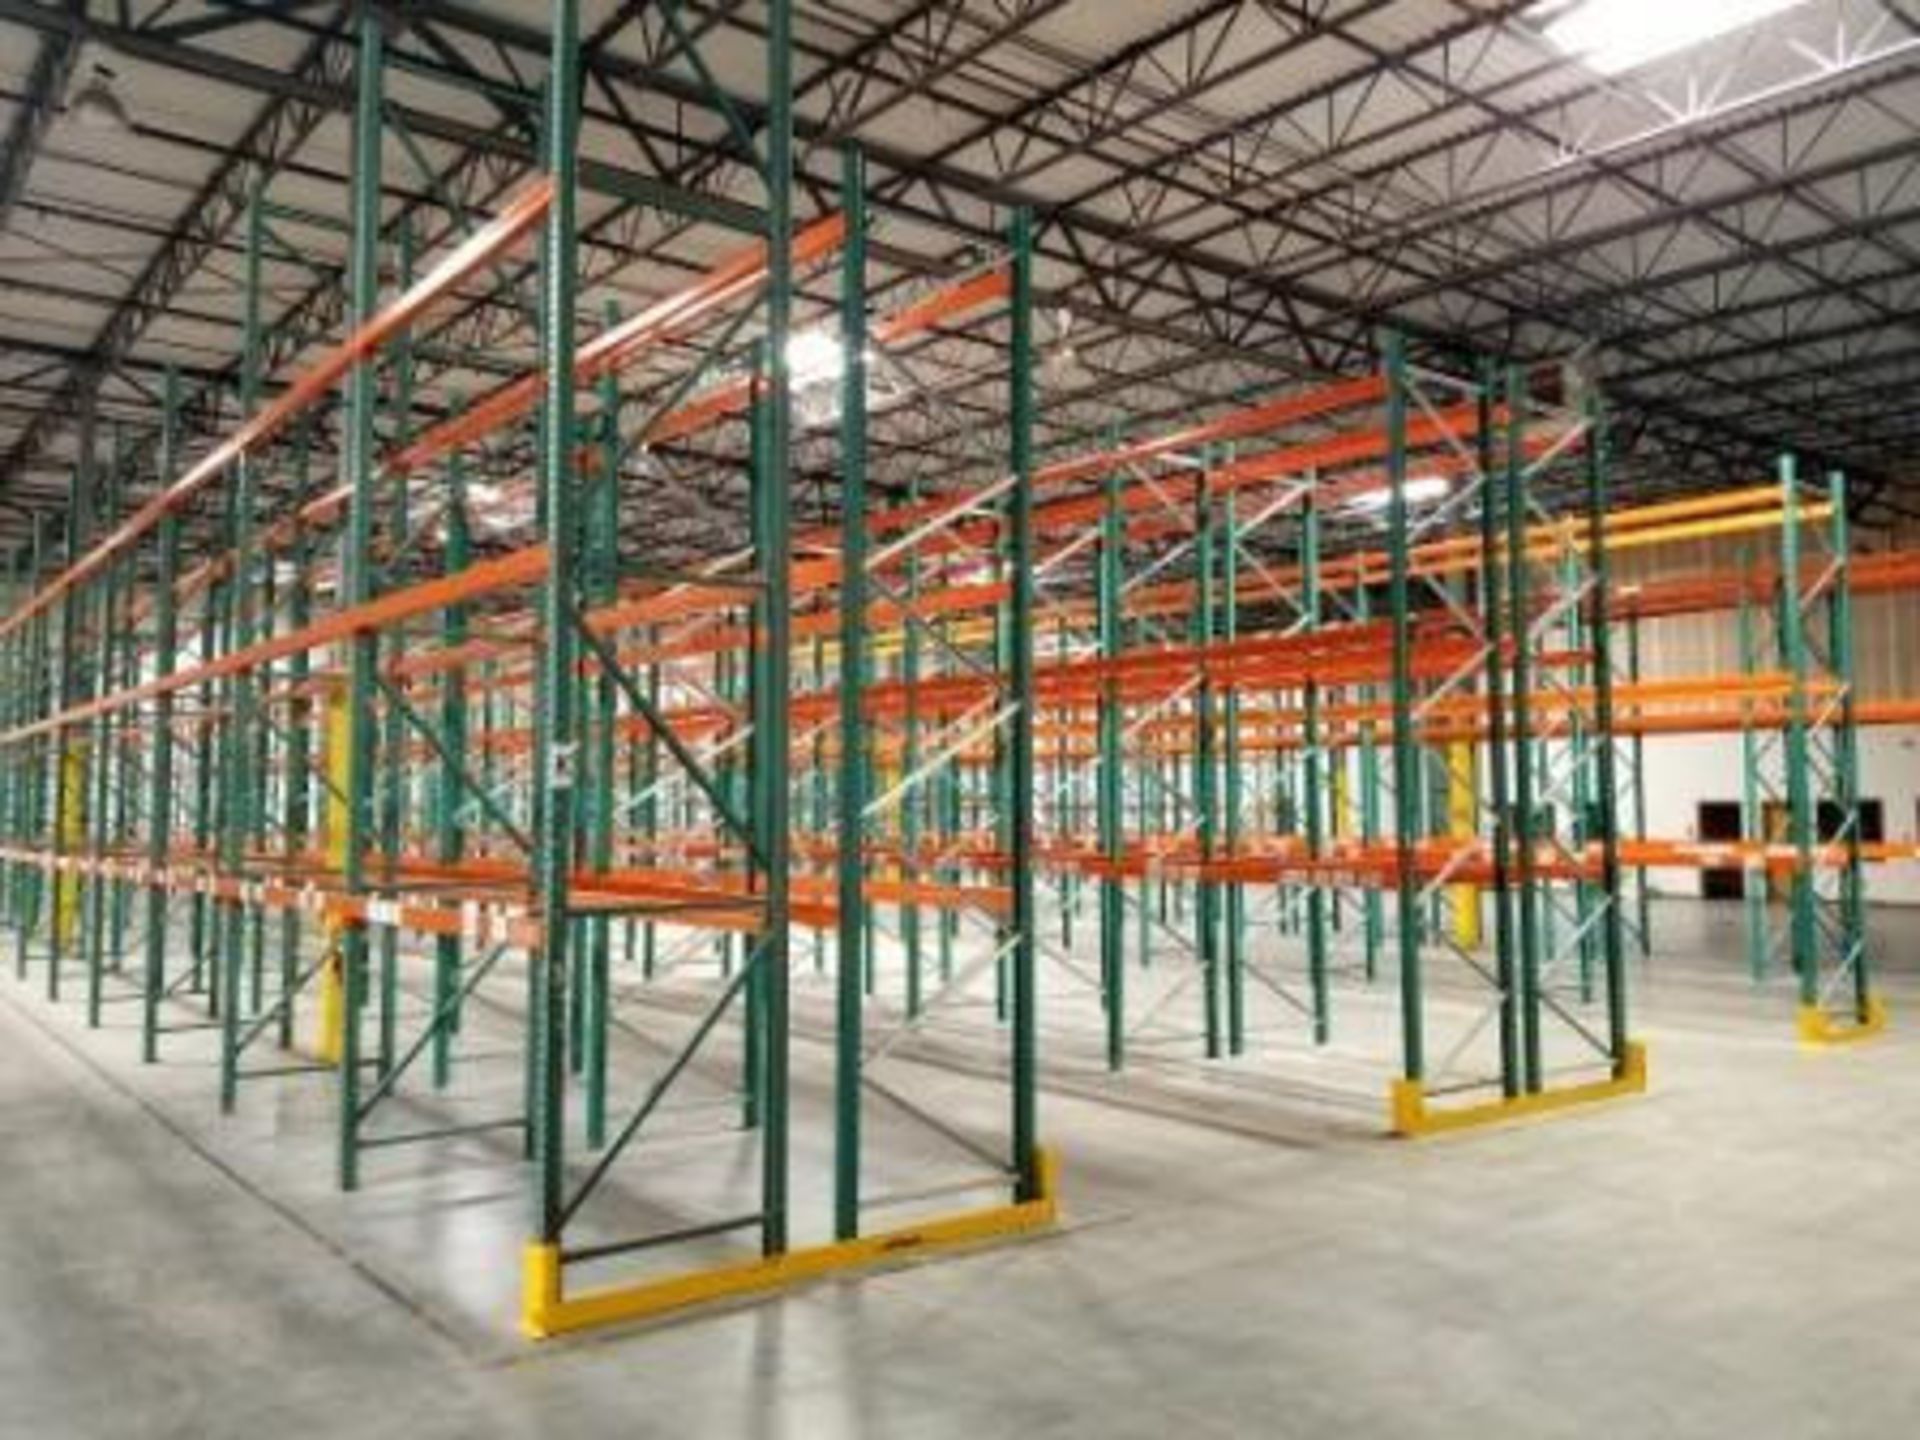 14 BAYS OF TEARDROP STYLE PALLET RACK, SIZE: 16'H x 42"D X 96"W - Image 4 of 4